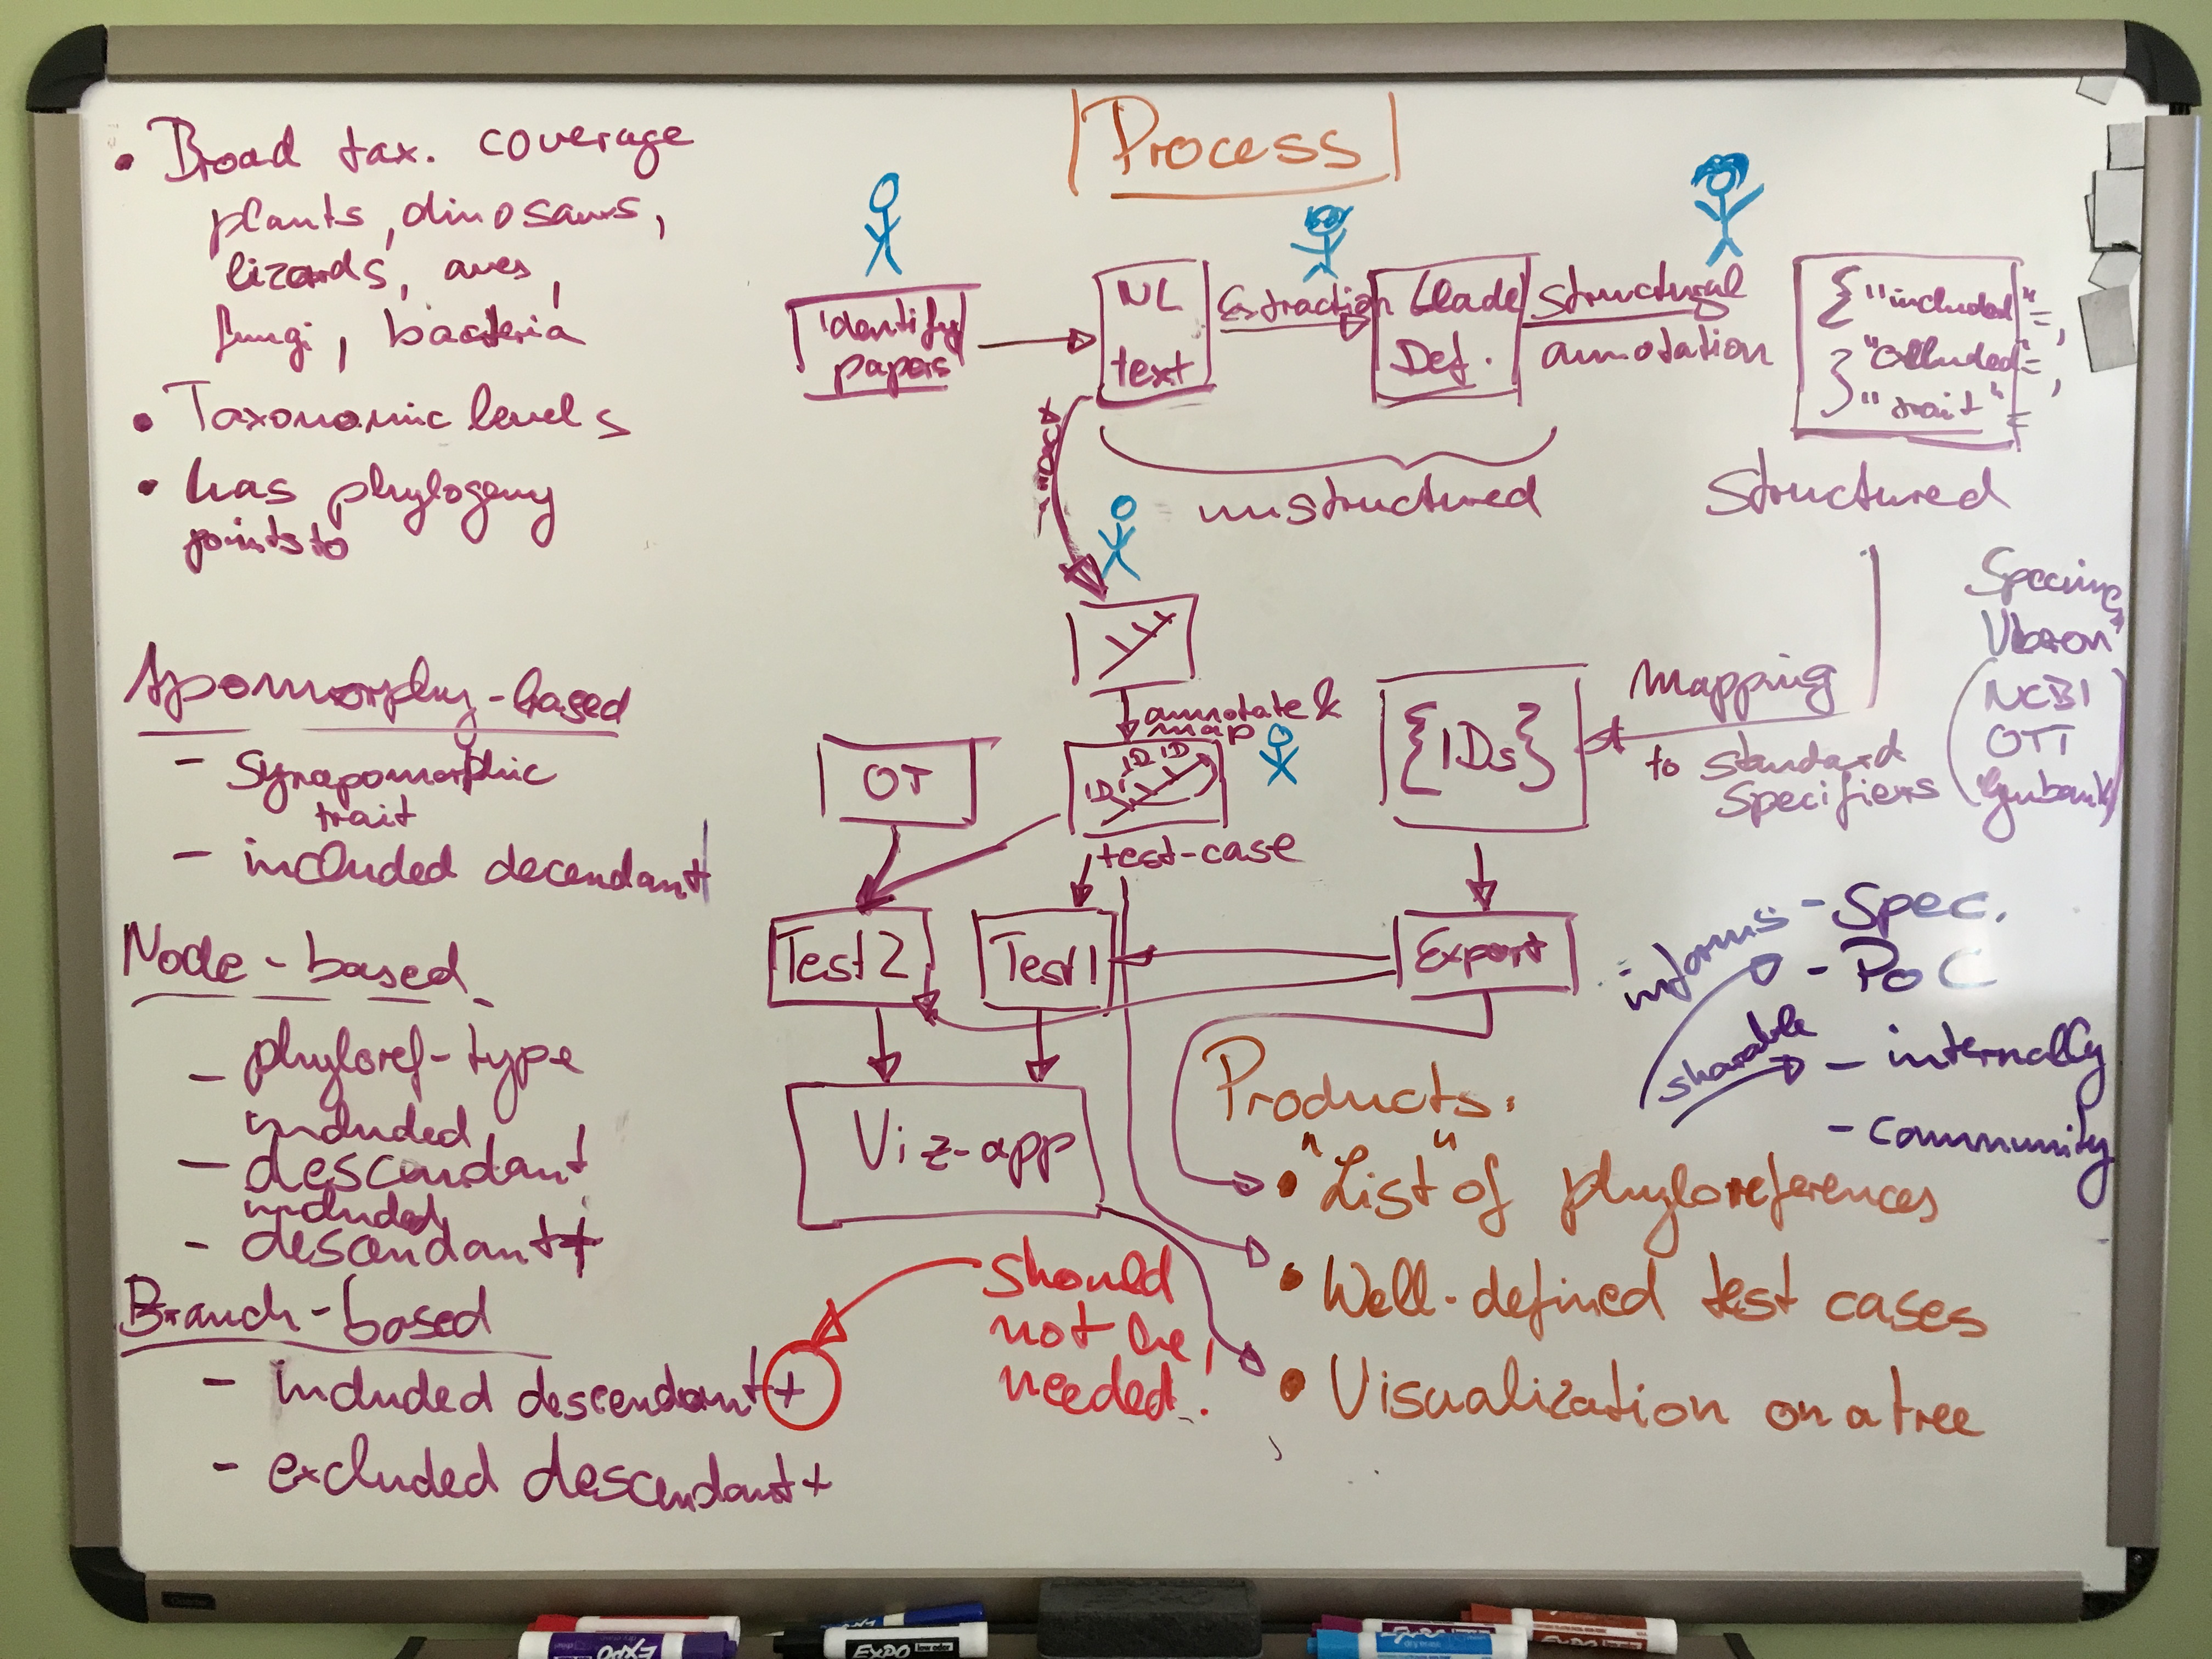 A whiteboard showing our brainstorming on a curation workflow.